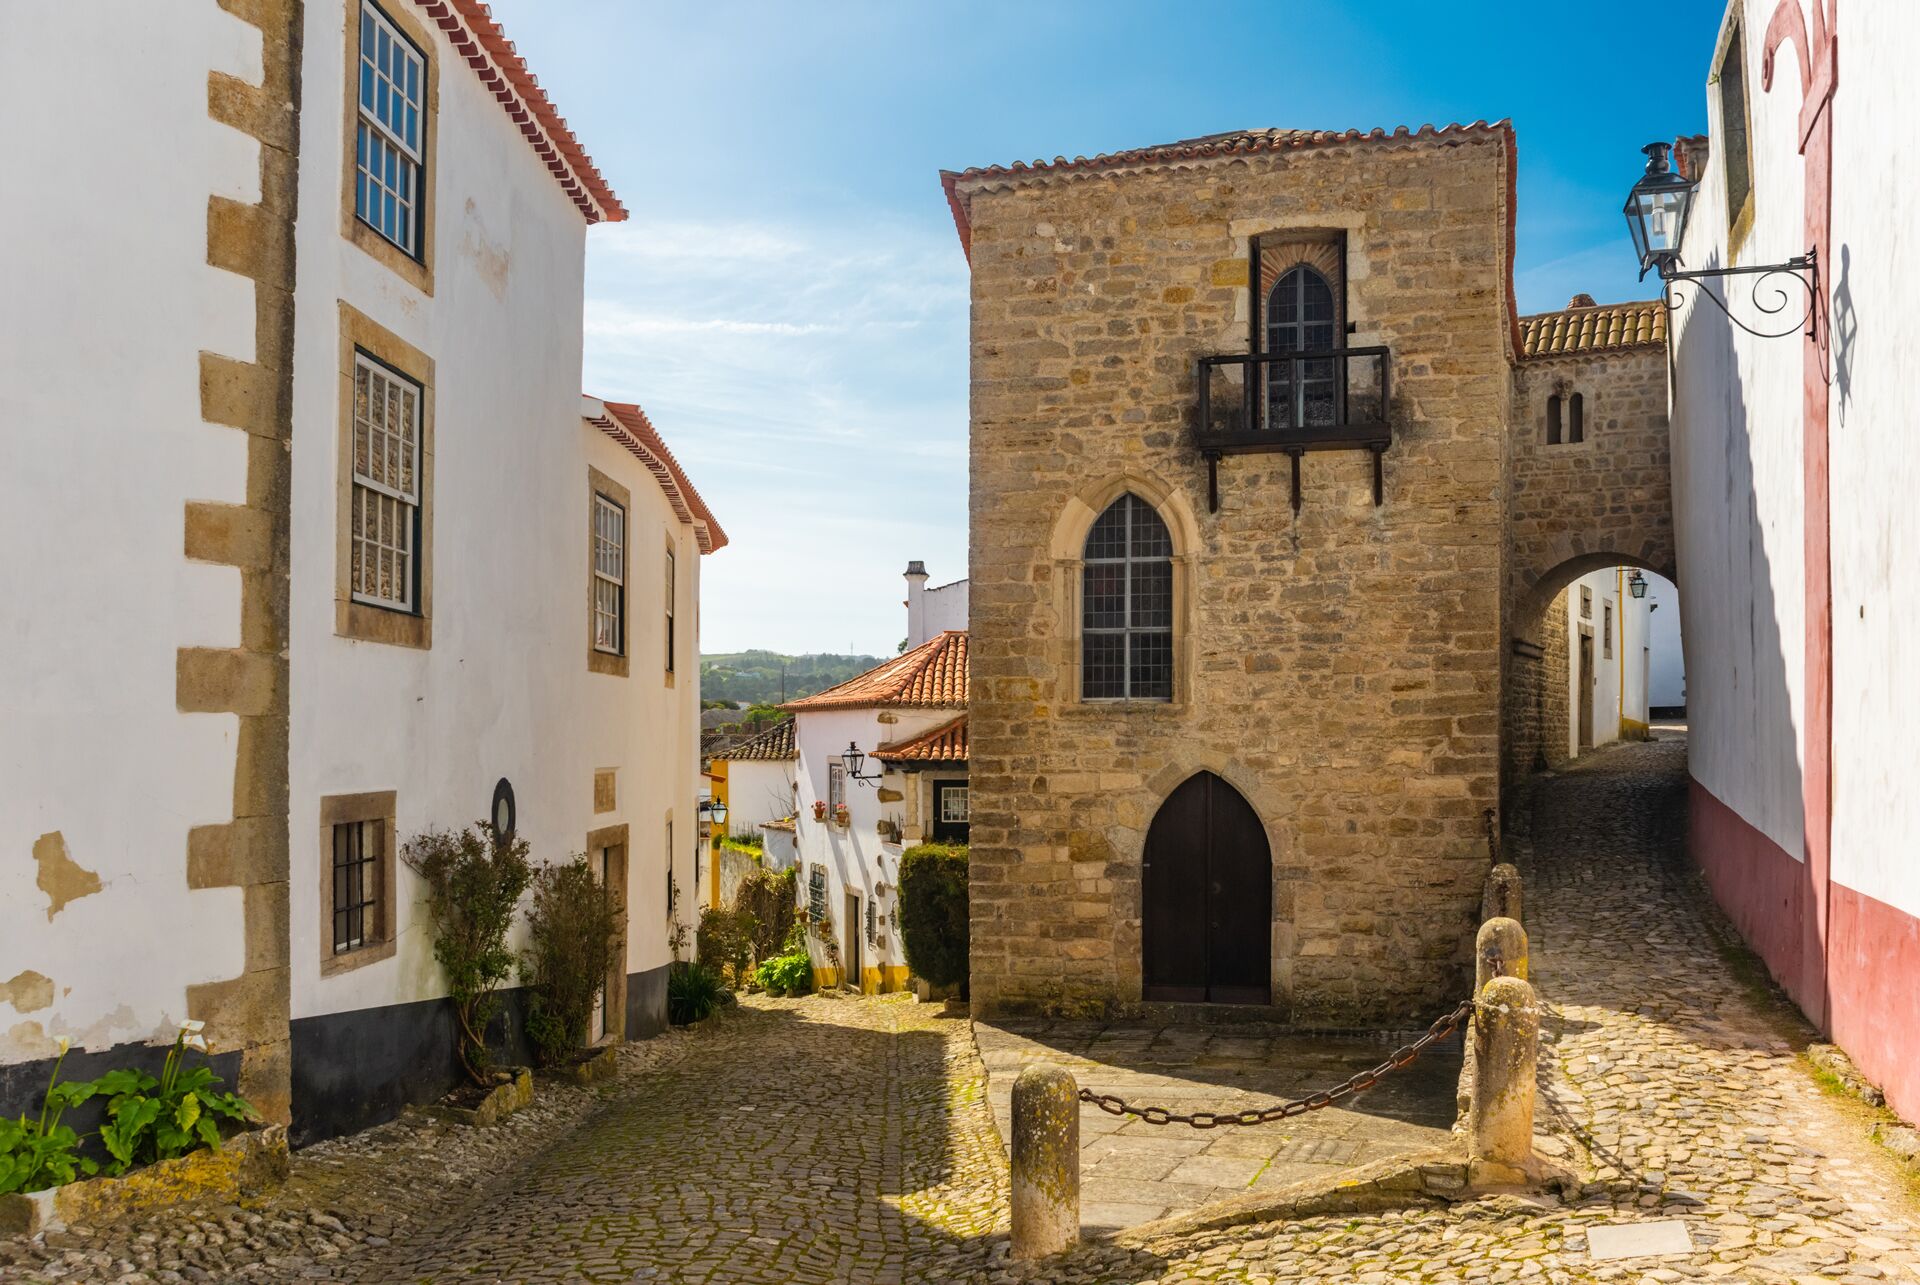 Best hotels in Óbidos (11 suggestions)